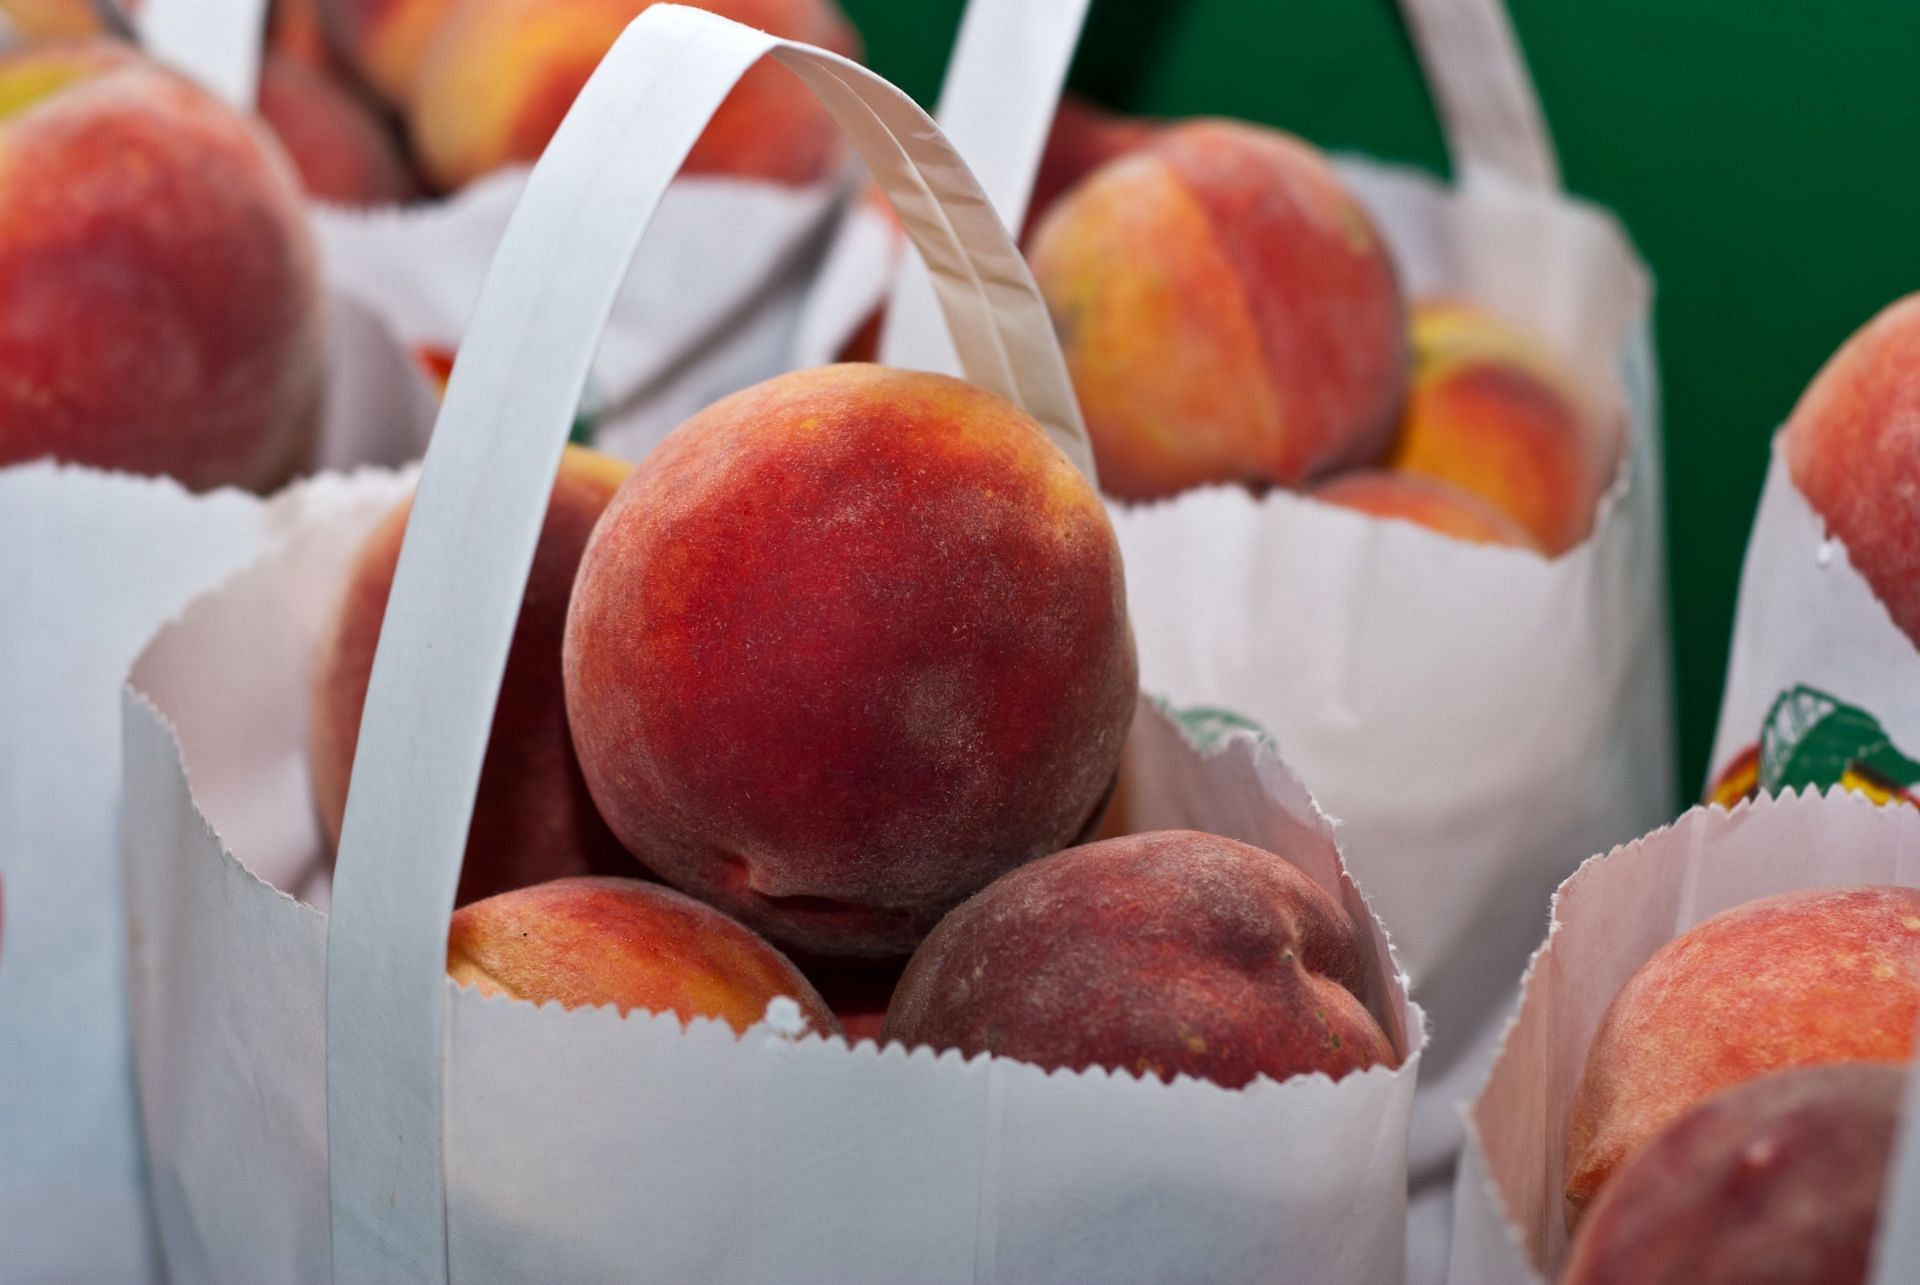 Peaches are a good source of vitamins and minerals such as vitamin A, vitamin C, vitamin E, and potassium (Image via Pexels)